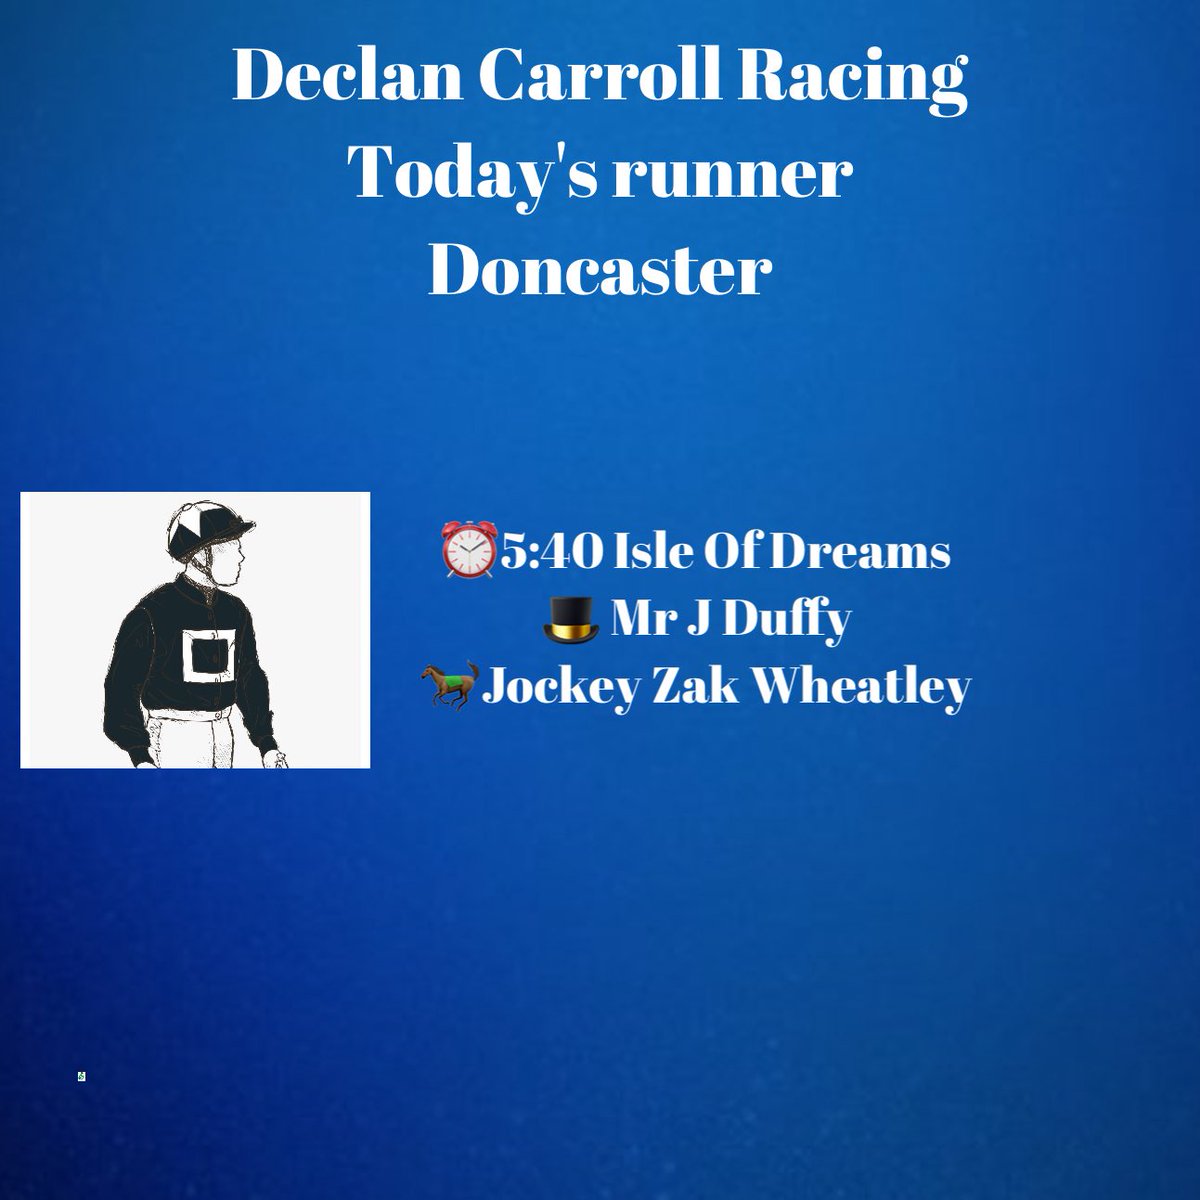 One runner this evening @DoncasterRaces @weeto_10 @freddytylicki @RacingSantry @YorkshireRacing